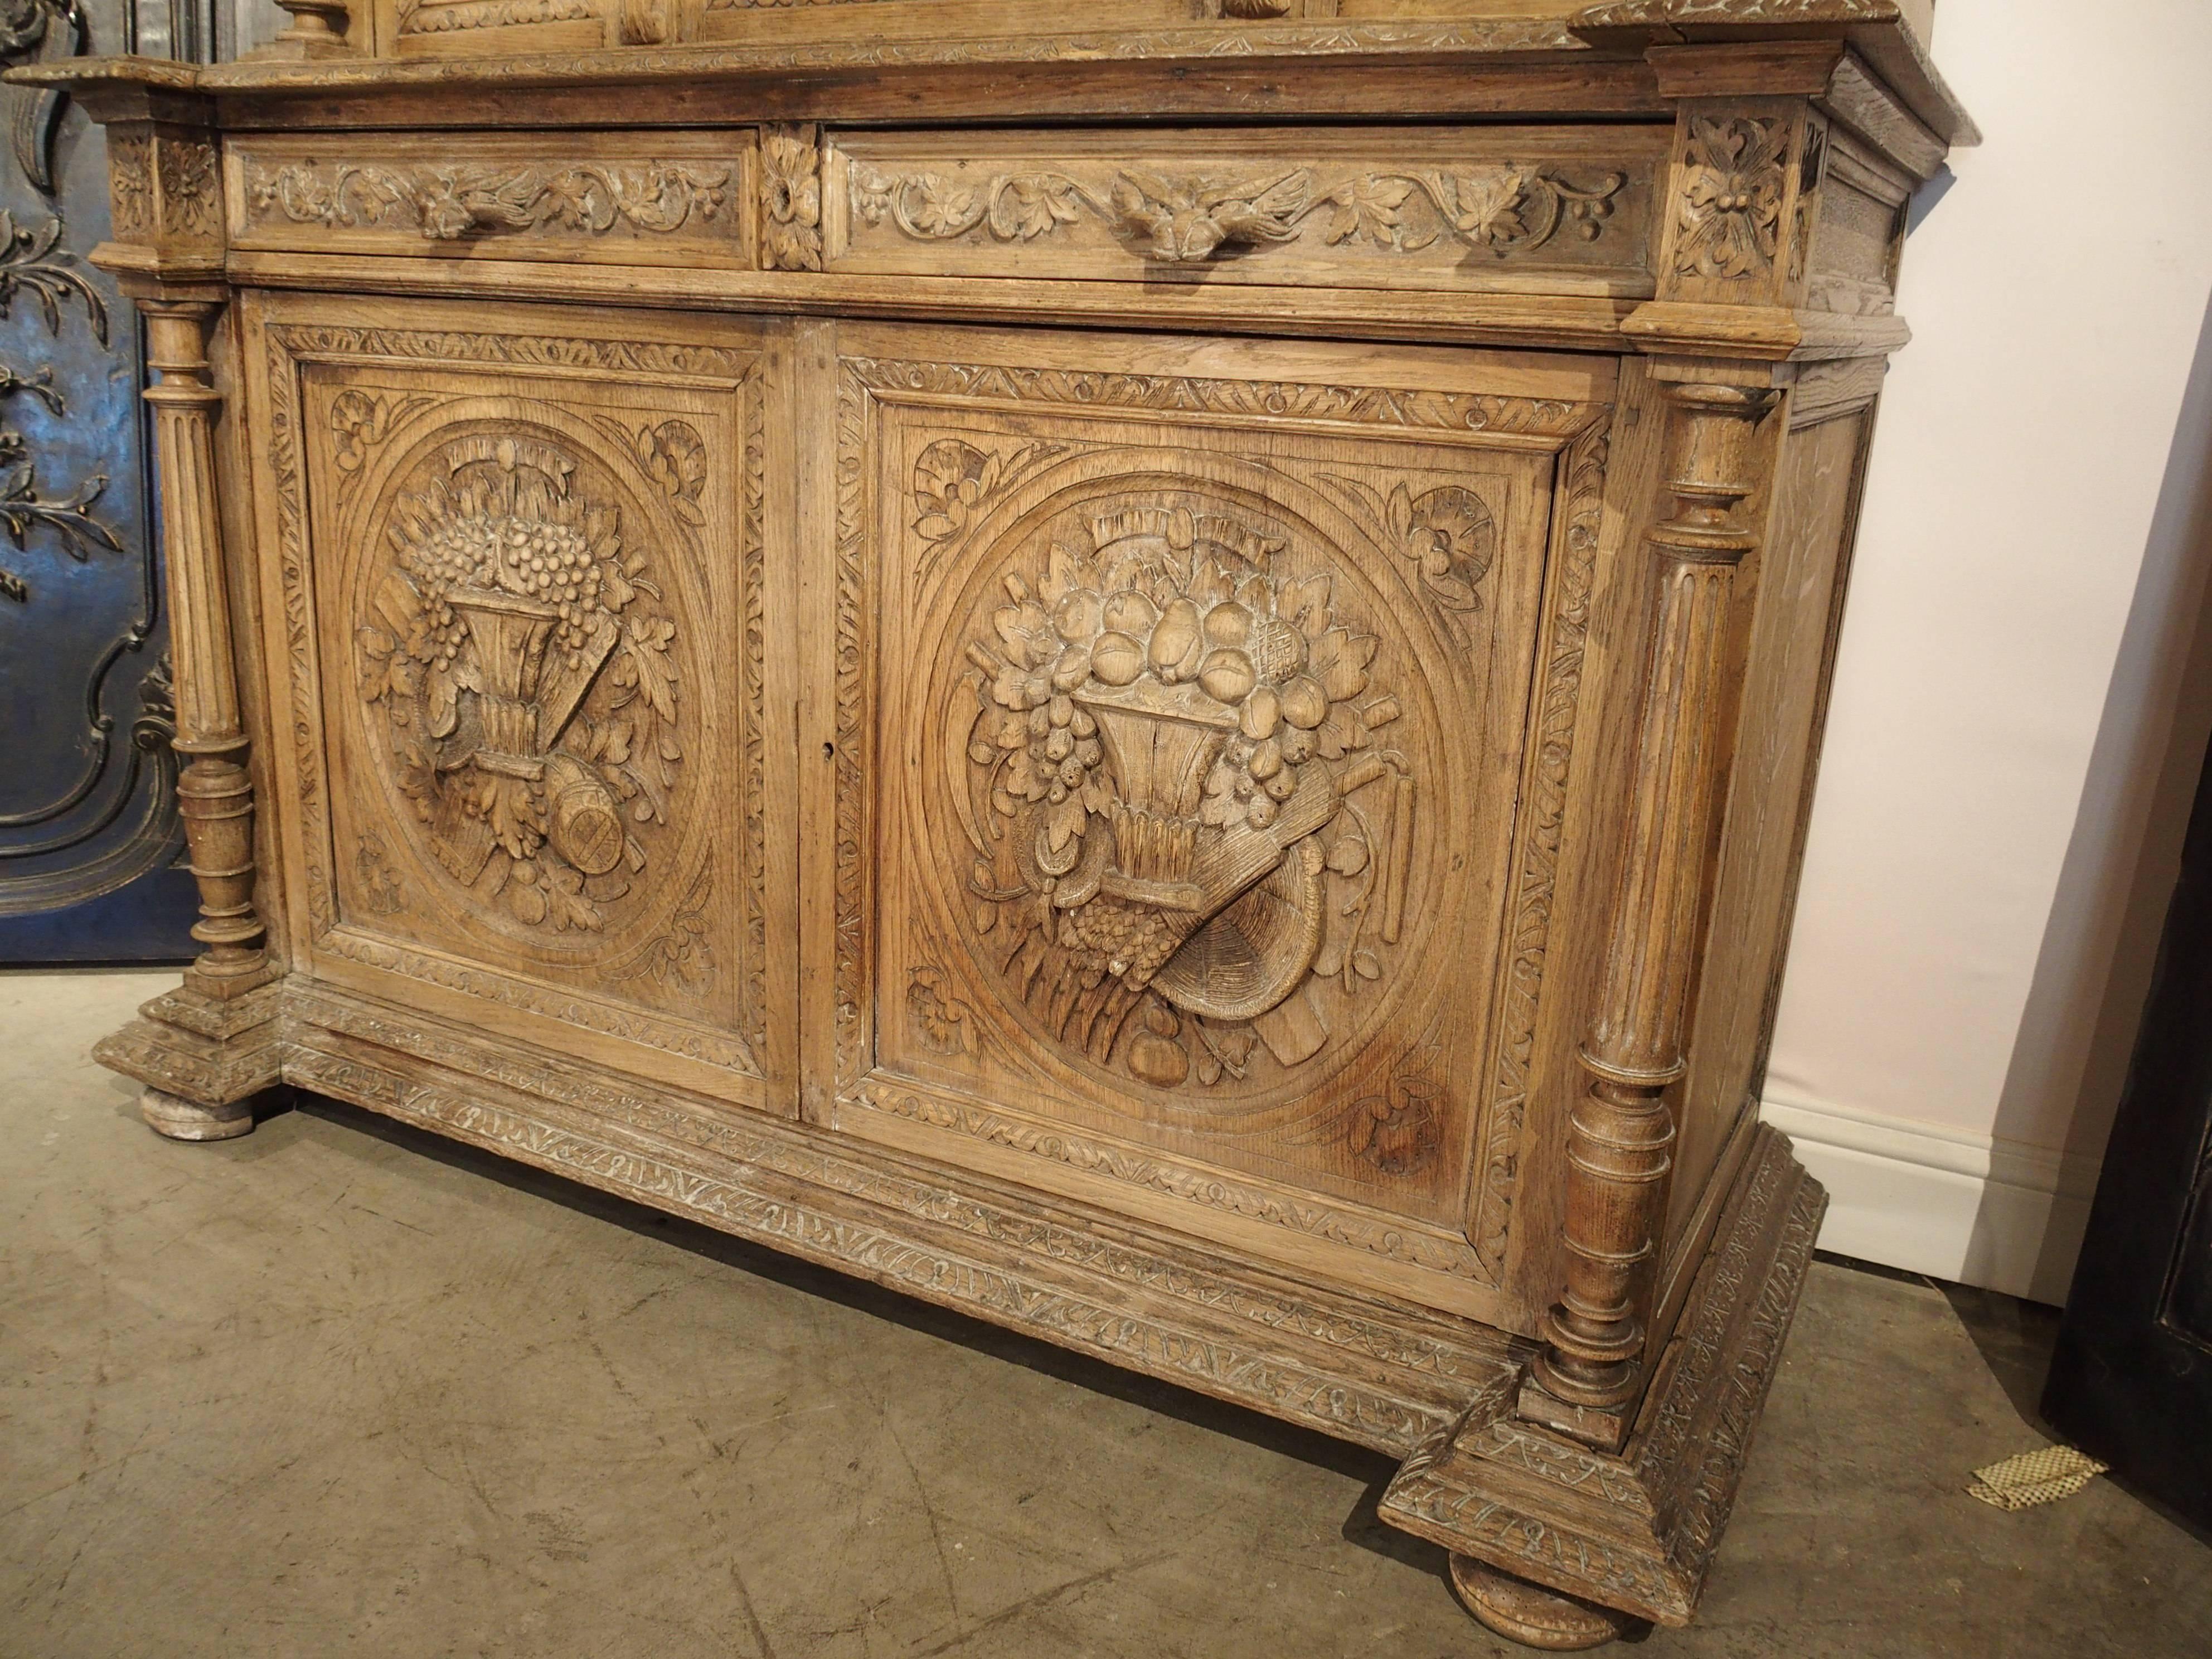 This deux corps has been stripped at some point in its history. This style of deux corps (two bodies or parts) has a narrower depth on the upper part than the lower part, with two drawers between. It has ornamentation in the style of Louis XIII,